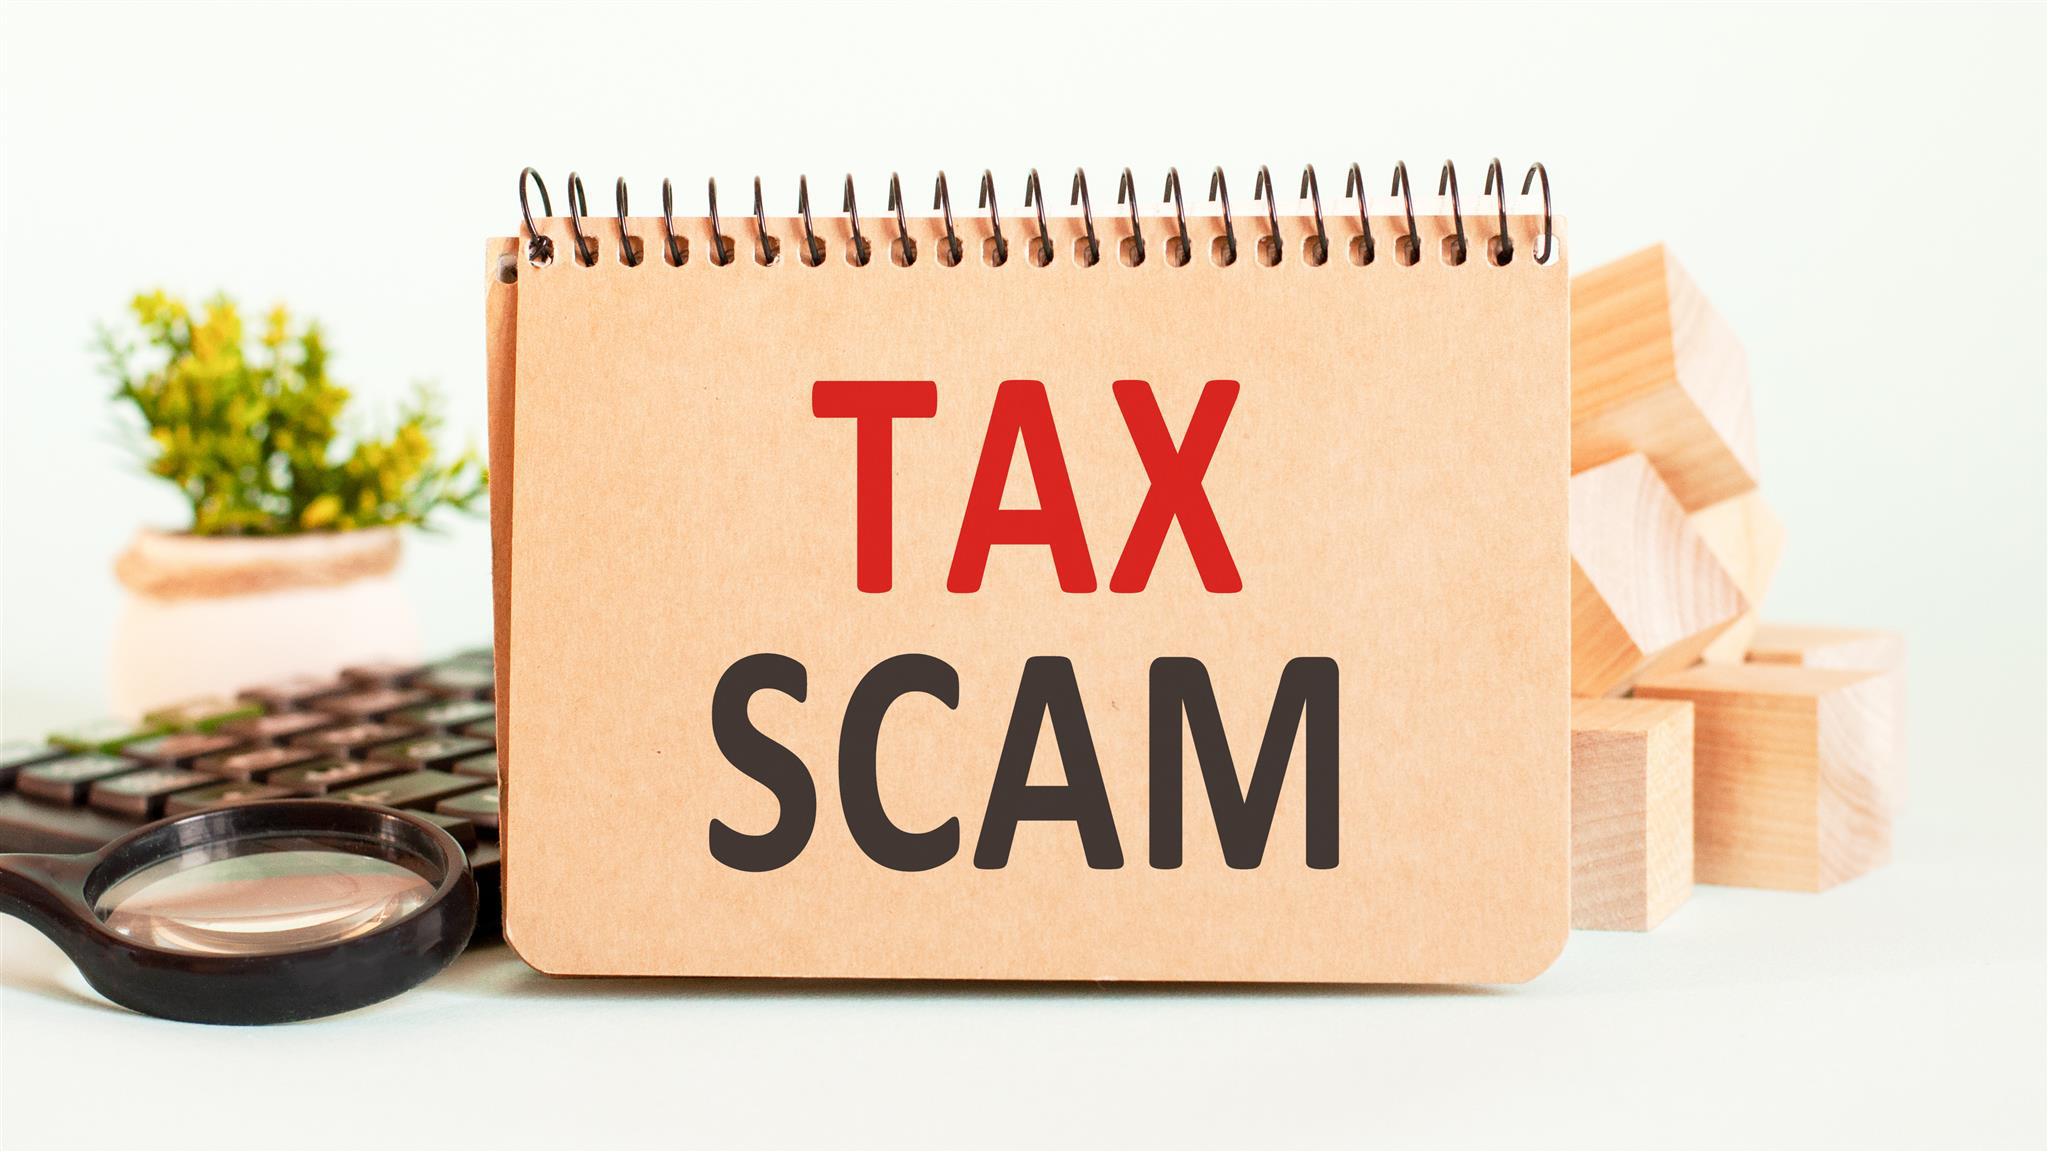 IRS's 2022 Dirty Dozen tax scams